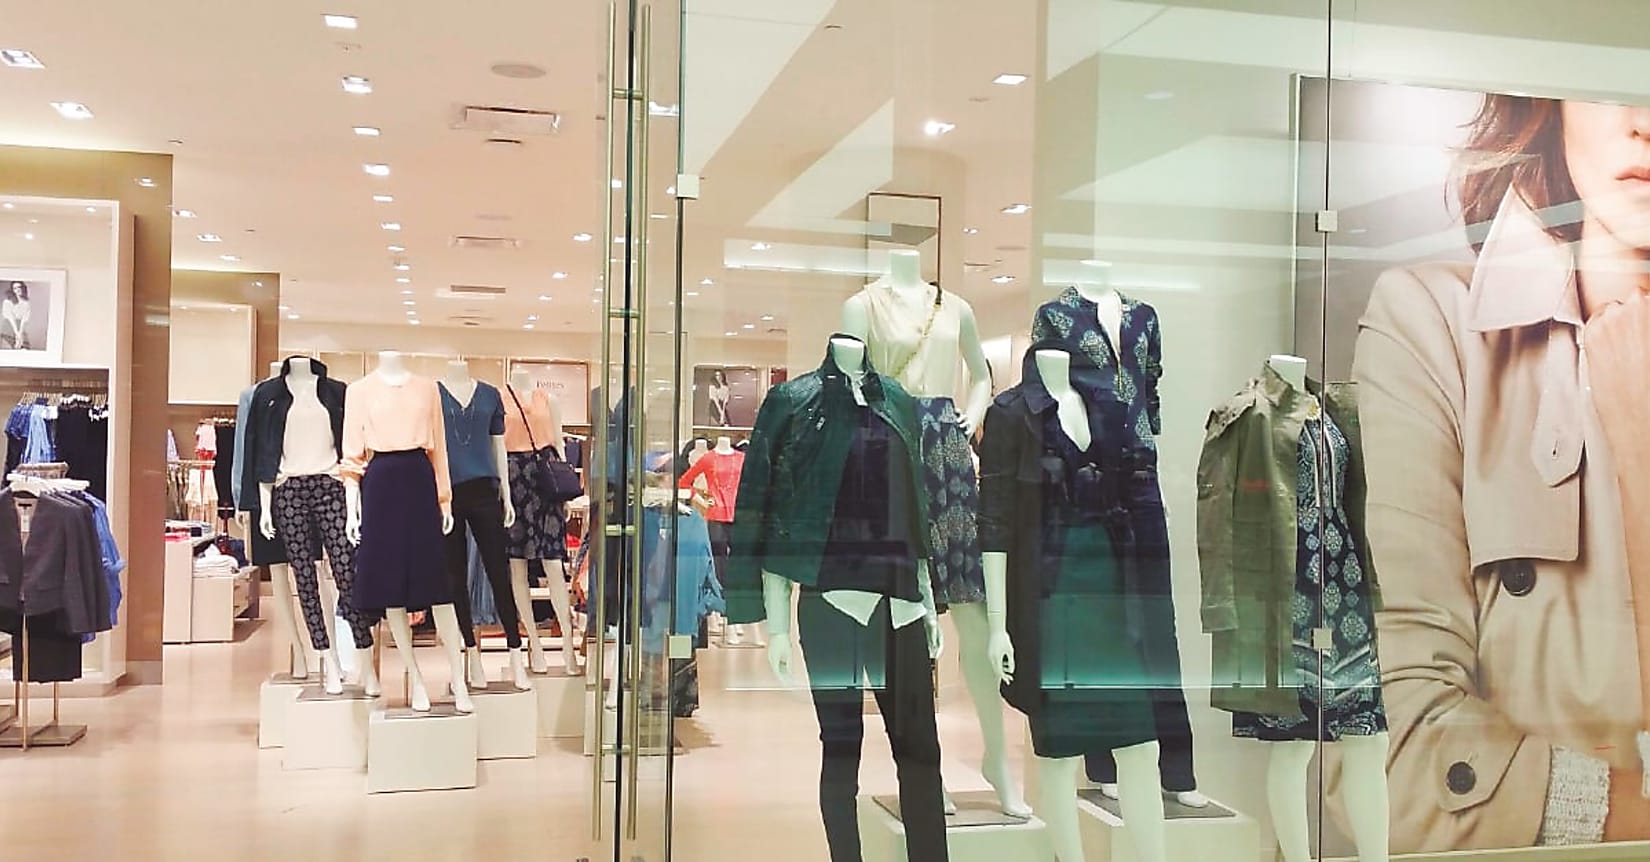 HVAC control for energy saving in textile retail stores